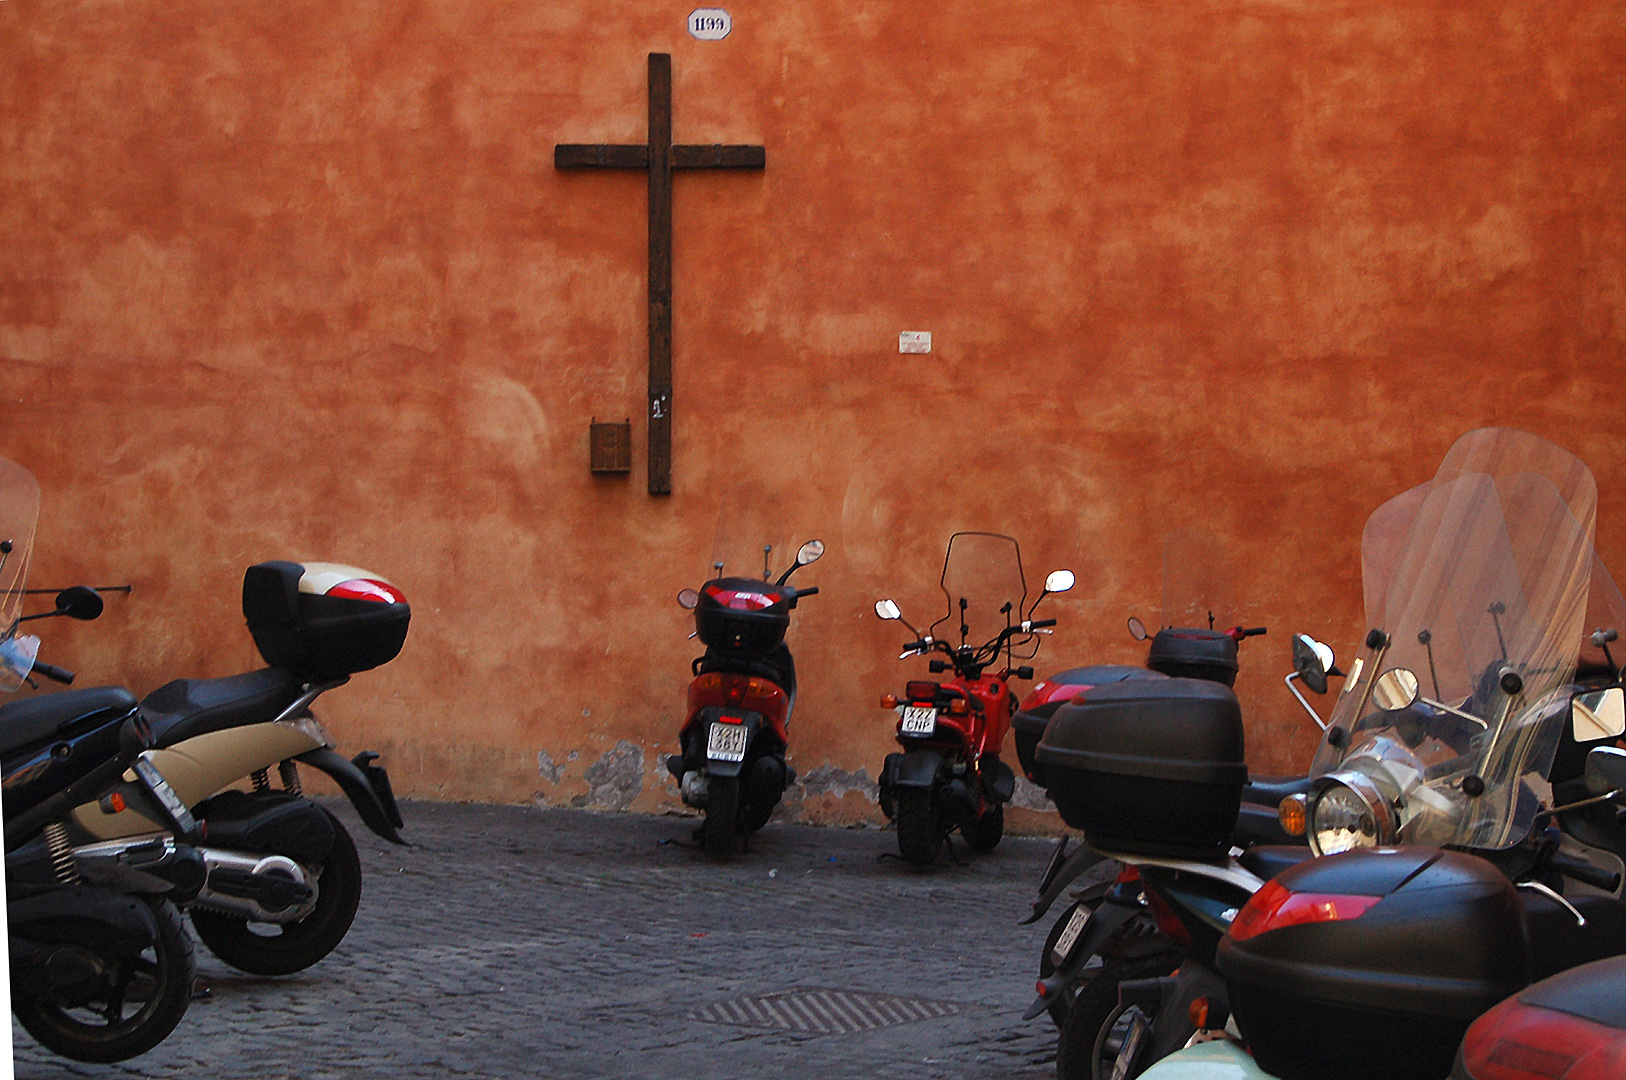 Scooters (Rome, Itali), Motorcycles (Italy, Latium, Rome)